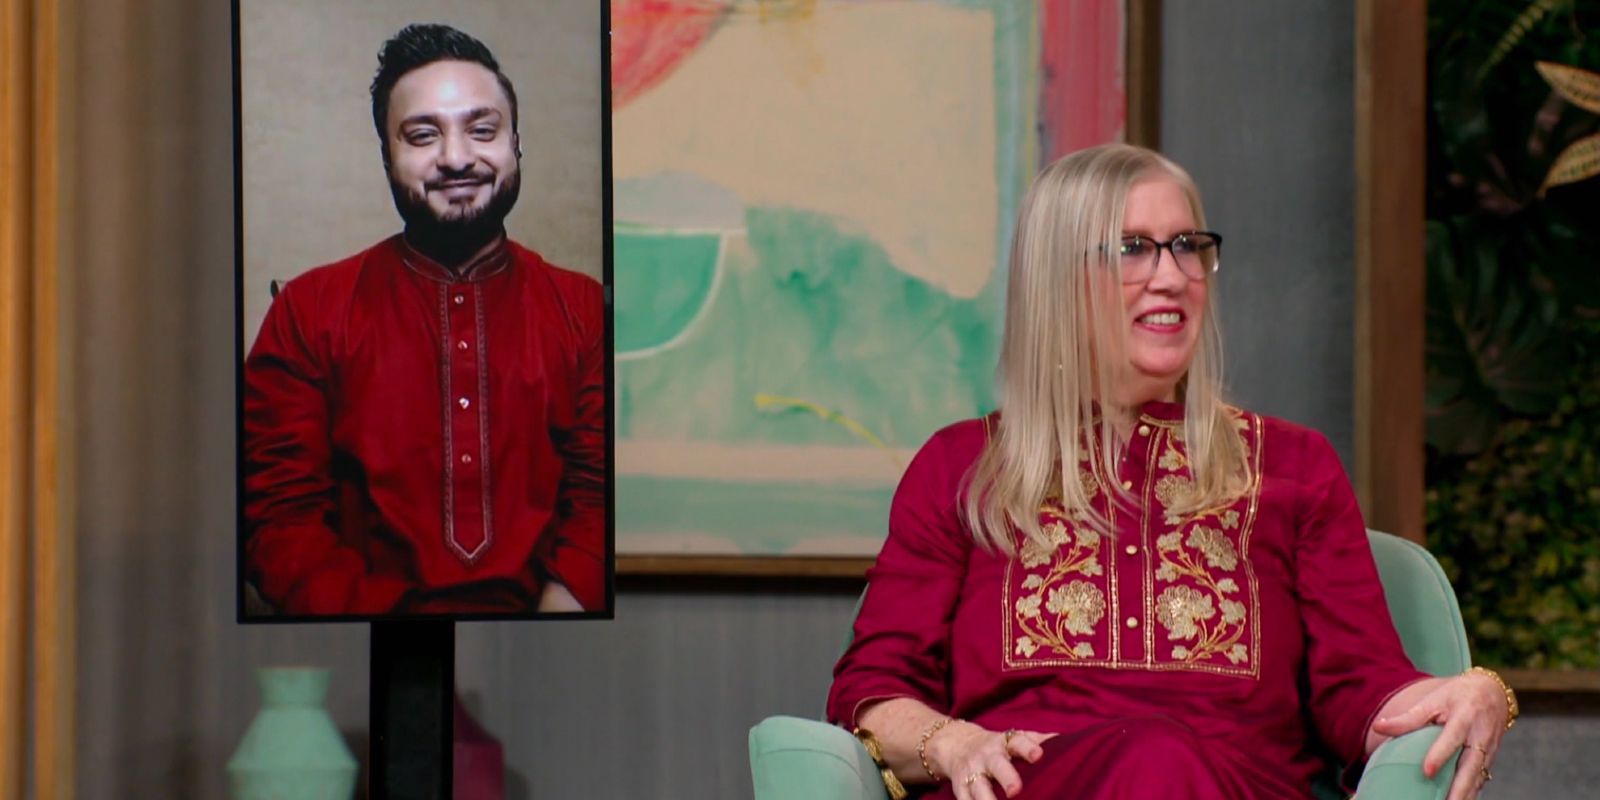 Jenny Slatten e Sumit Singh no 90 Day Fiancé: Happily Ever After temporada 7 Tell All